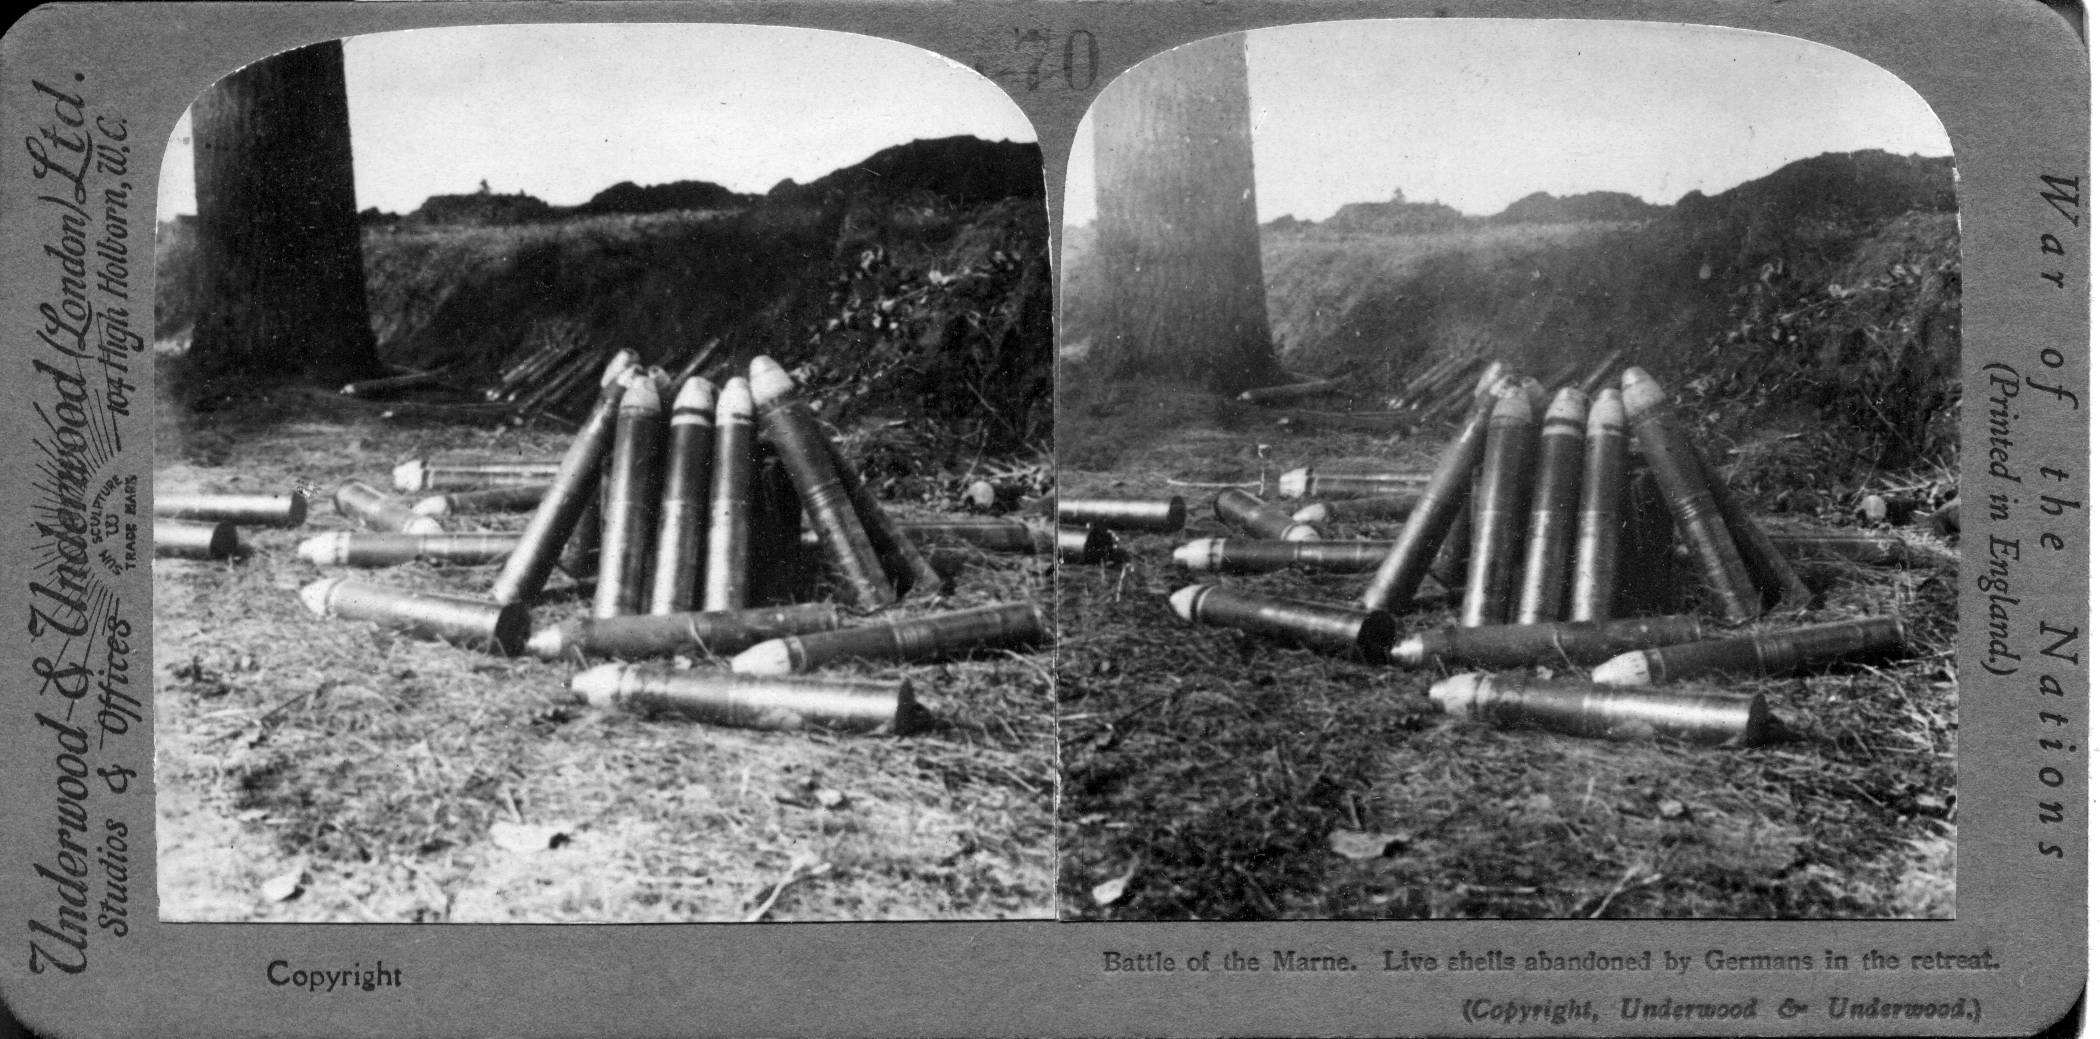 Battle of the Marne. Live shells abandoned by Germans in the retreat